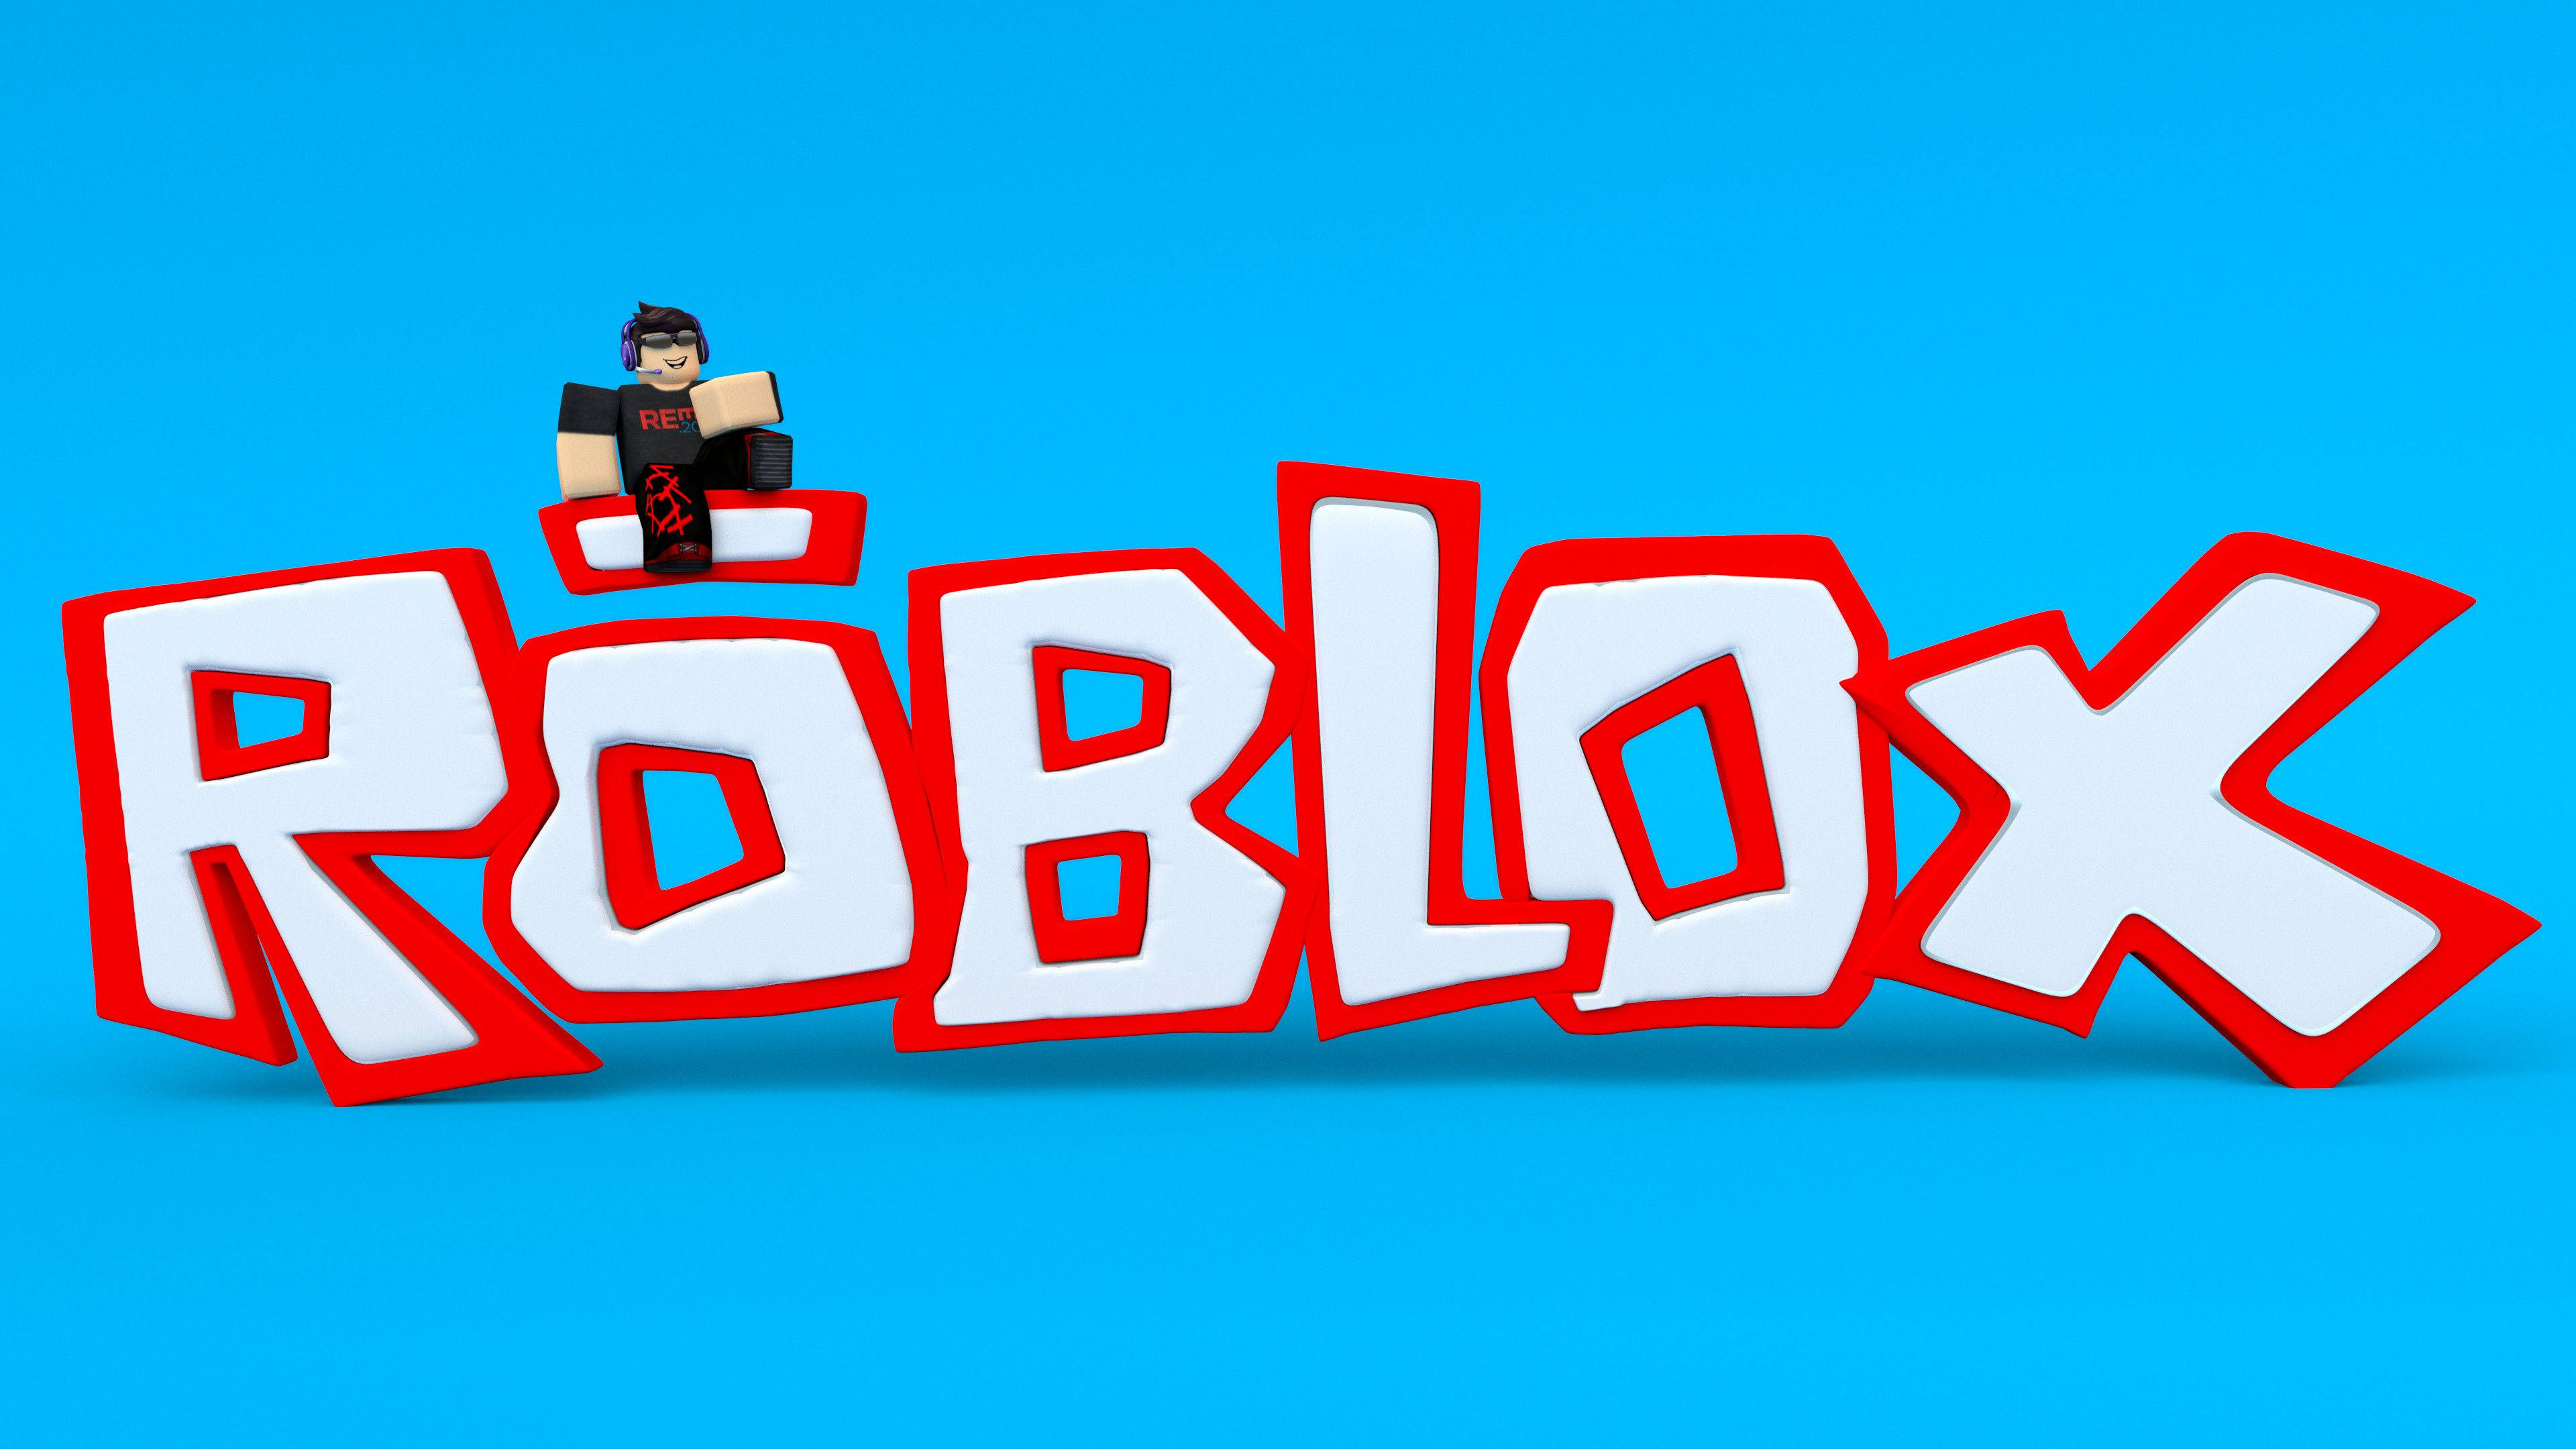 Roblox - Roblox updated their cover photo.